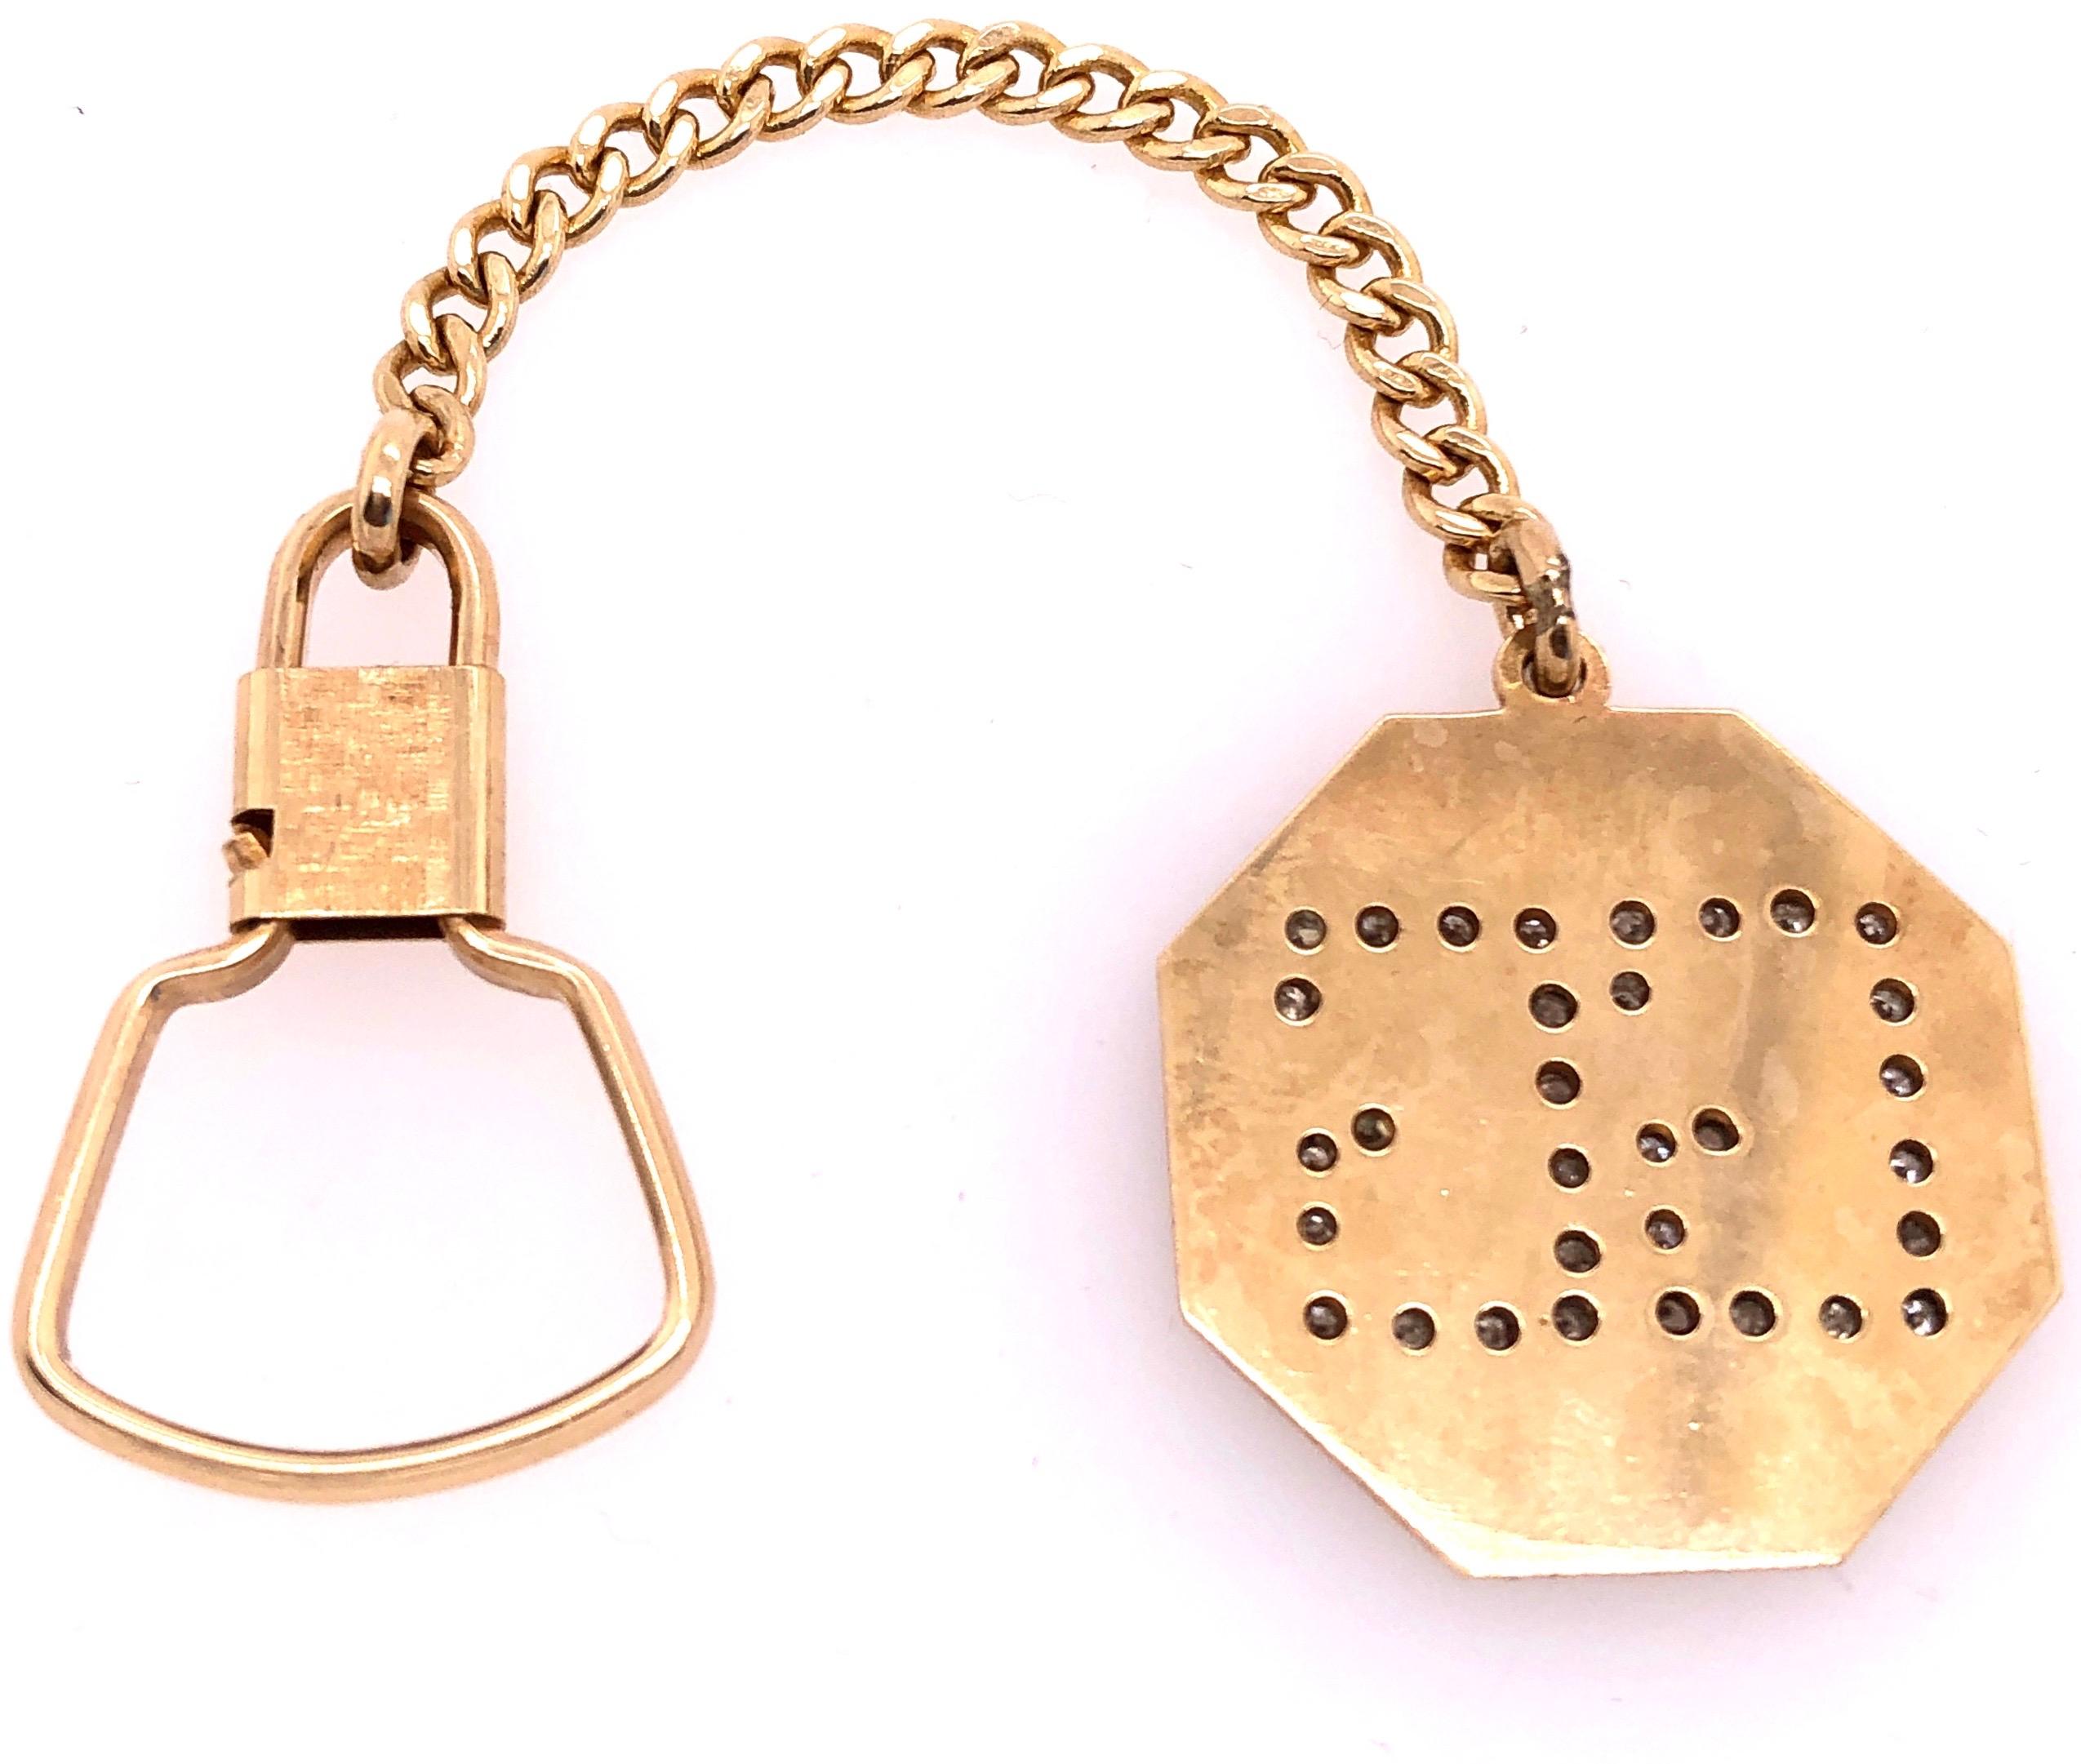 14 Karat Yellow Gold 5 inch Octagon Key Chain with Diamond Initials GG
Octagon Size: 28x28
14.1 grams total weight.
